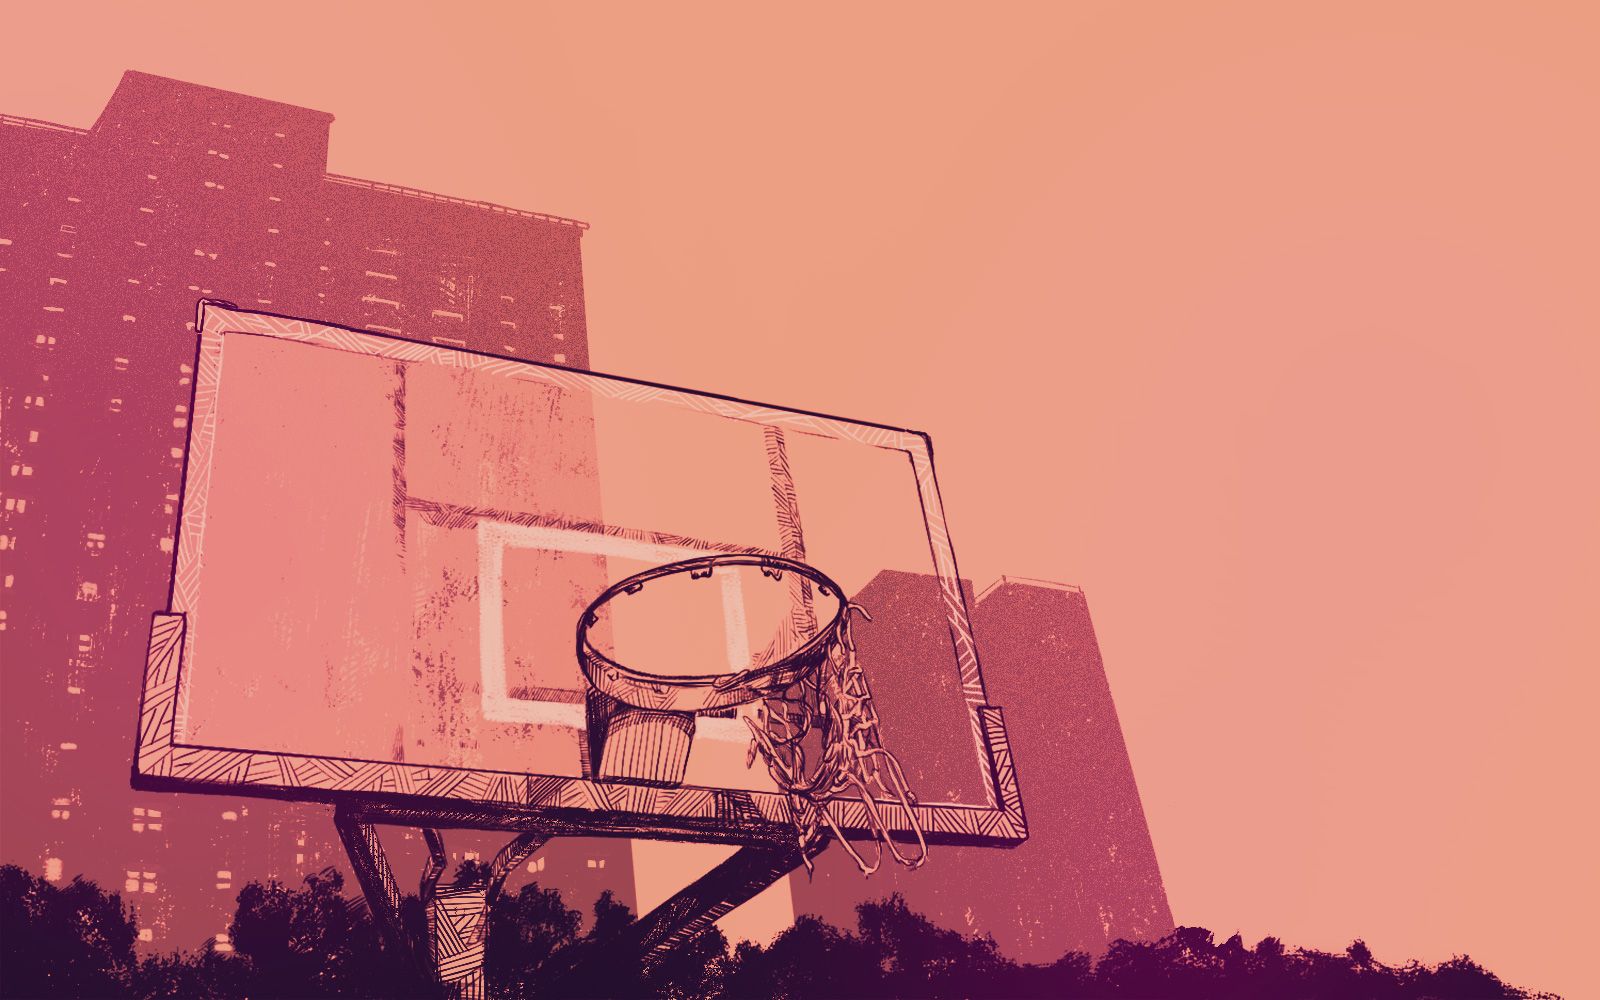 Playground basketball is dying